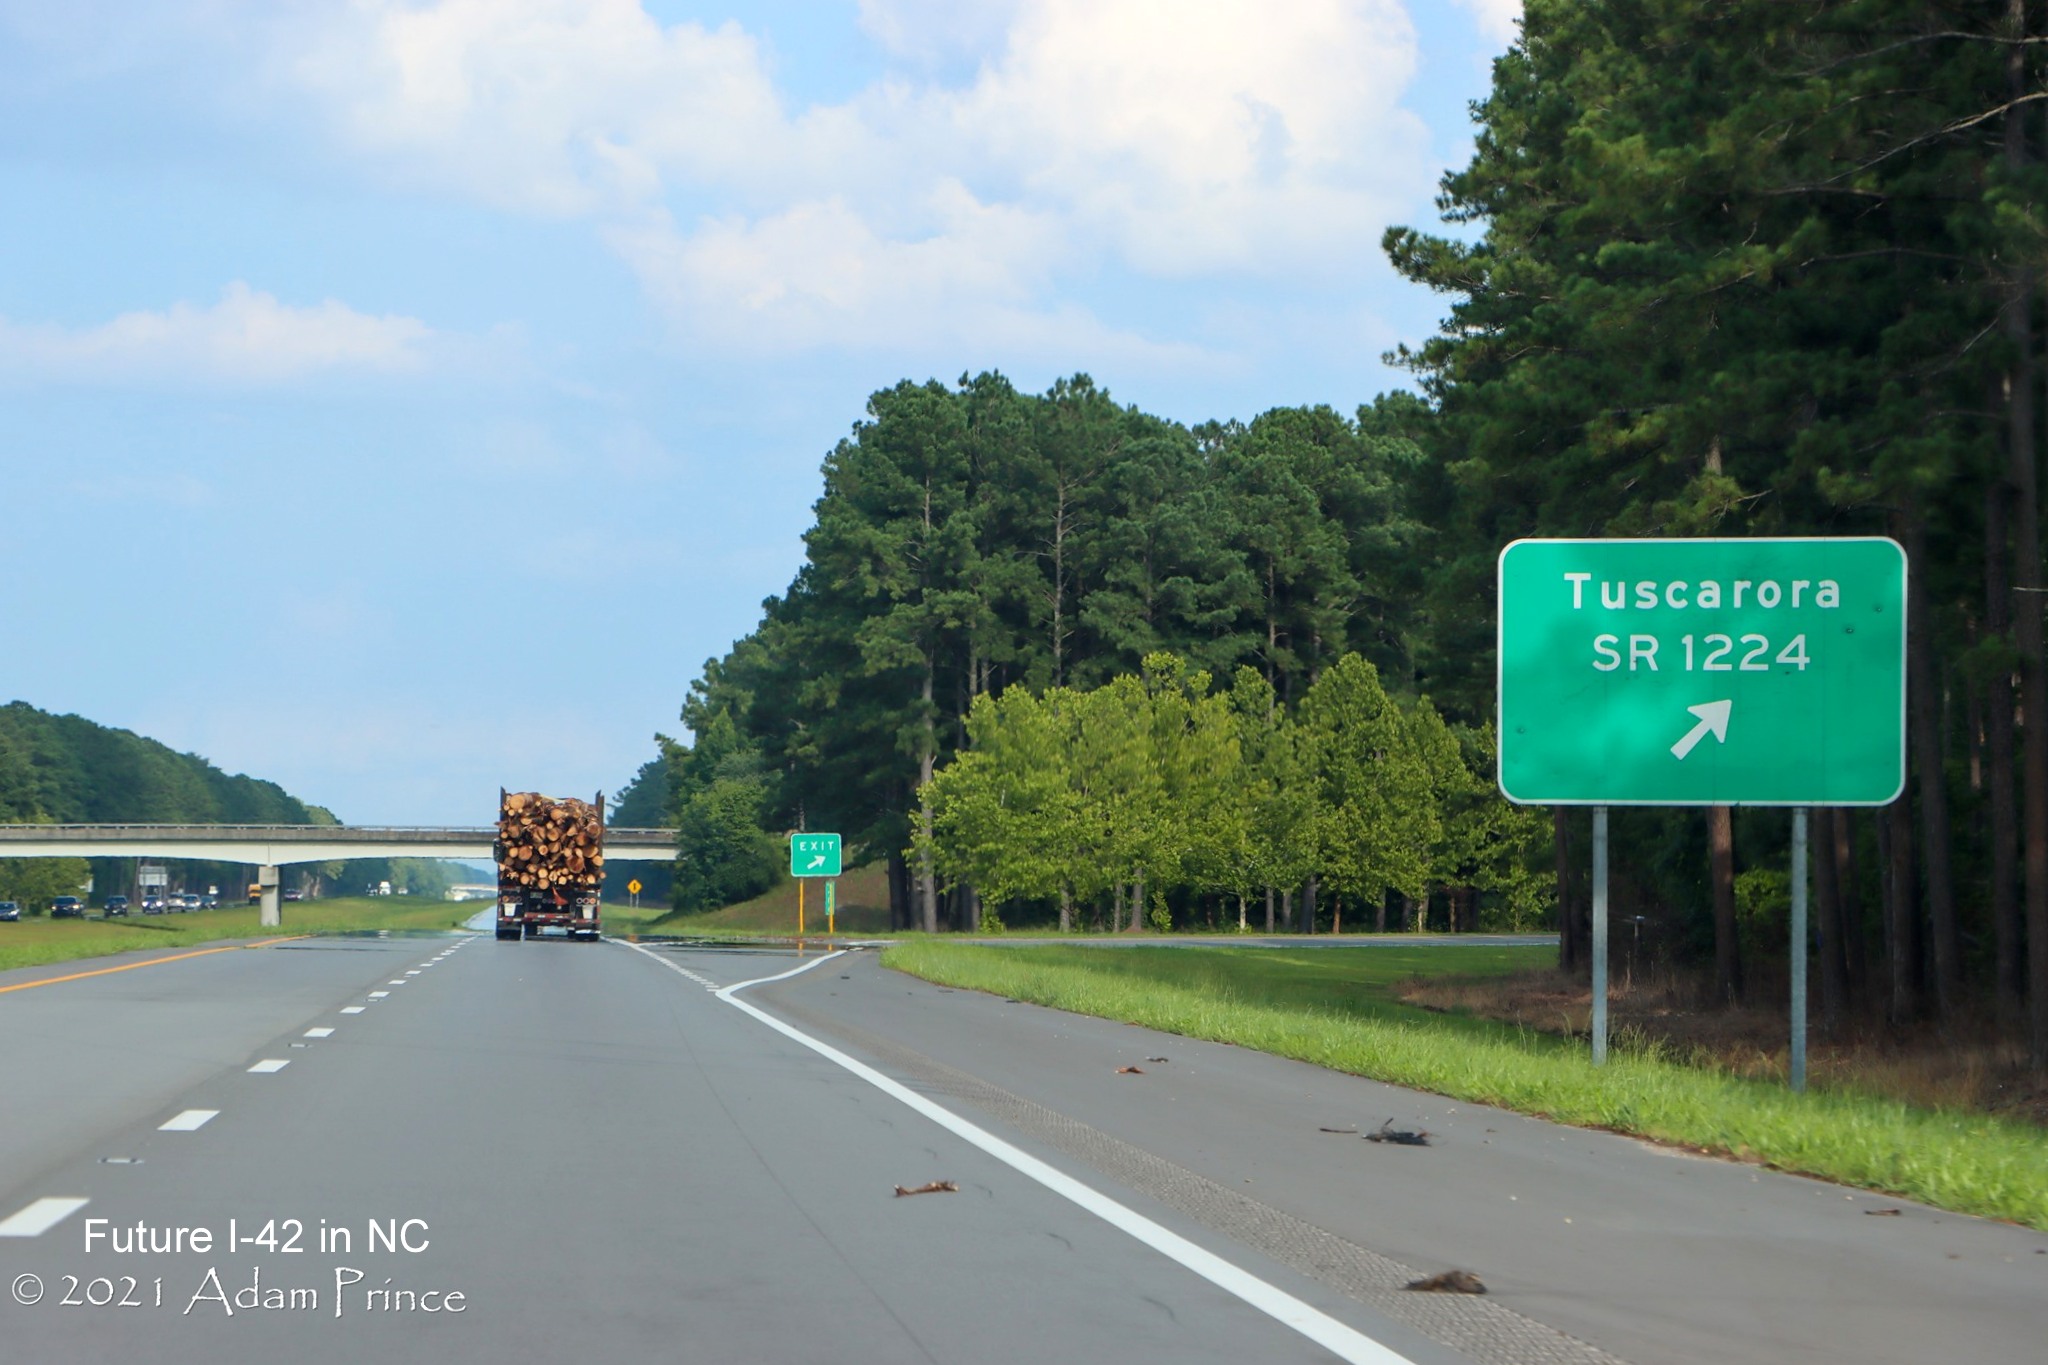 Image of SR 1224 exit sign along newly widened right shoulder of US 70 (Future I-42) East near Tuscarora, photo by Adam Prince, July 2021